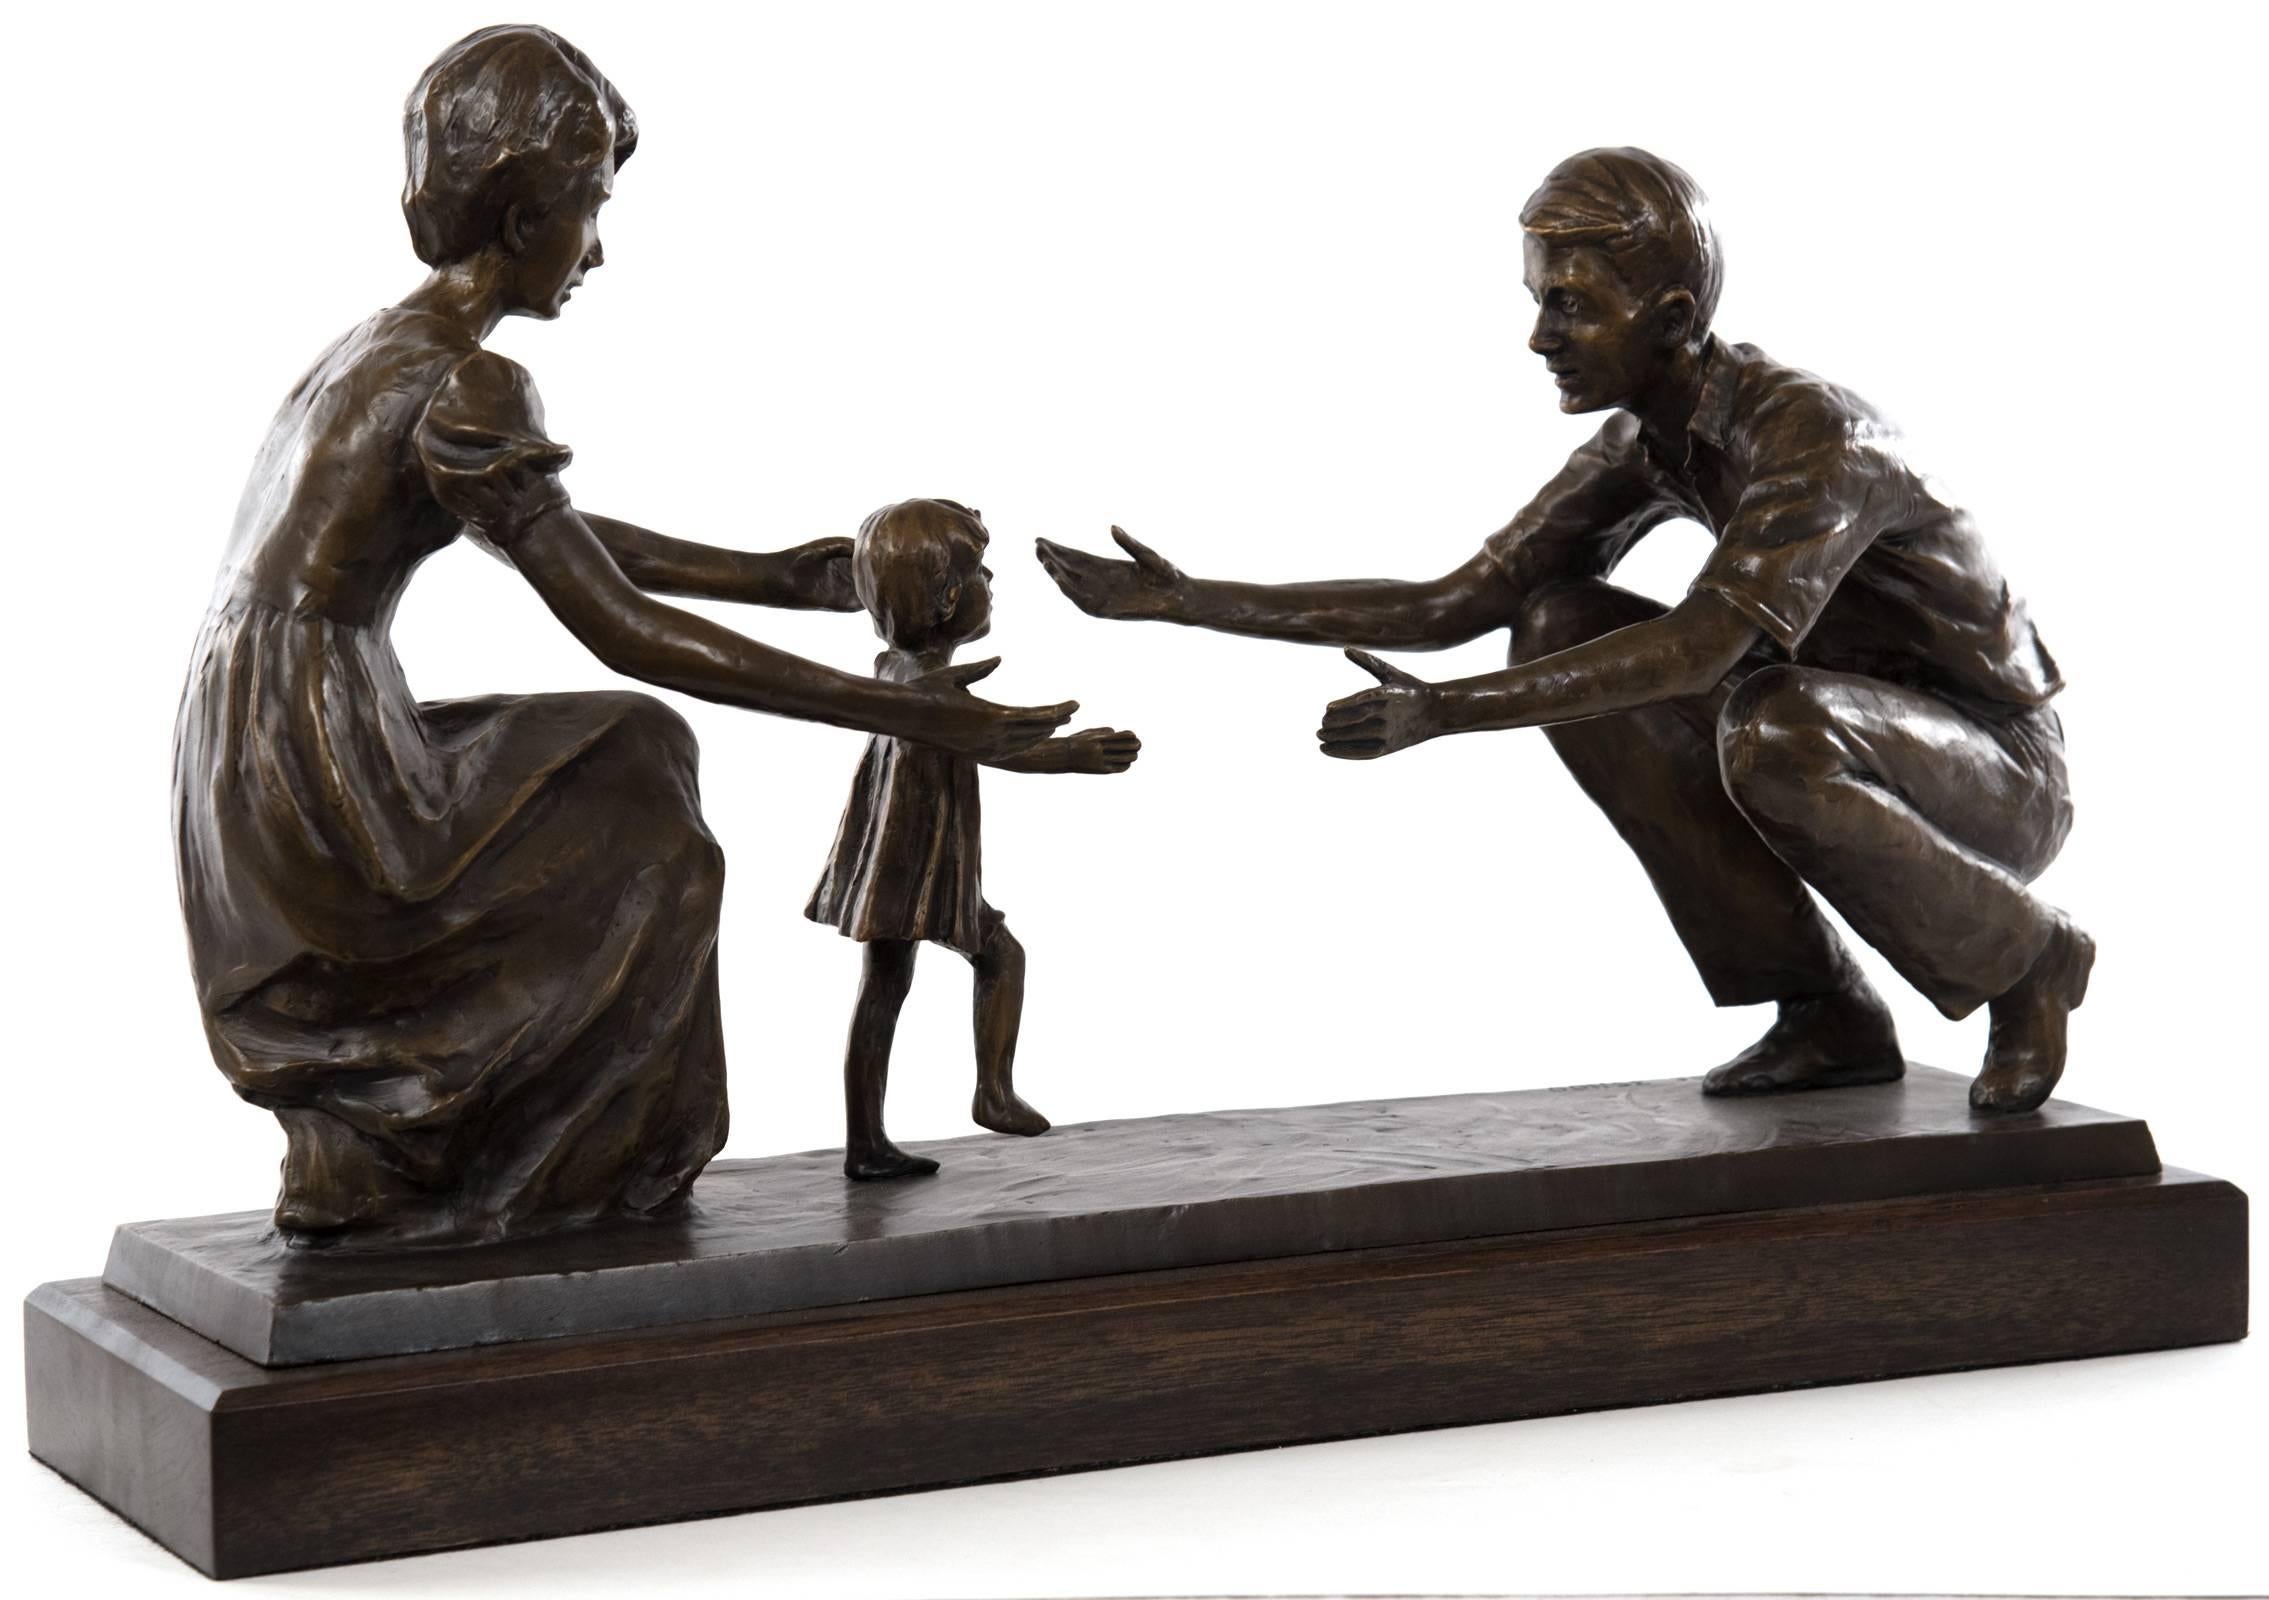 An intimate moment between a mother and a father as their young daughter takes her first steps, leaving the security of her mother's arms as she attempts to walk toward her father's open arms. The sculpture captures the anticipation and excitement